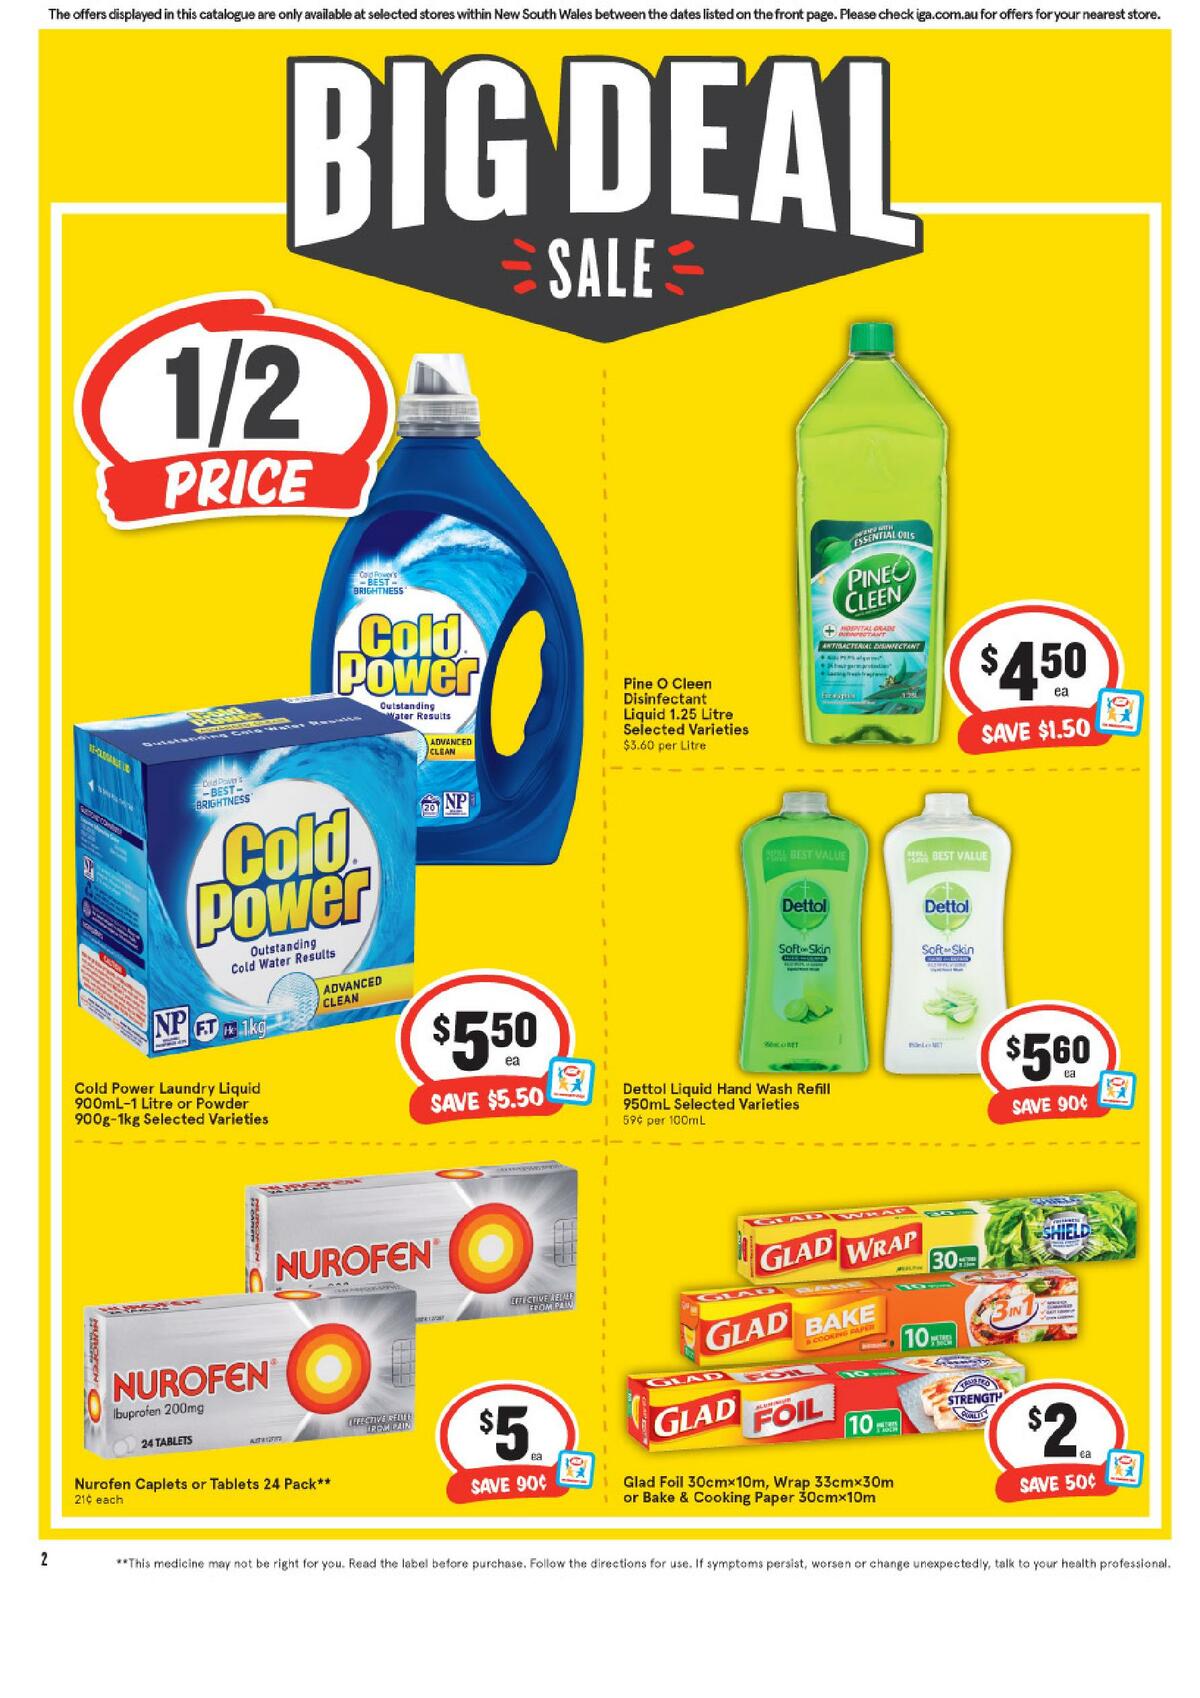 IGA Catalogues from 4 August